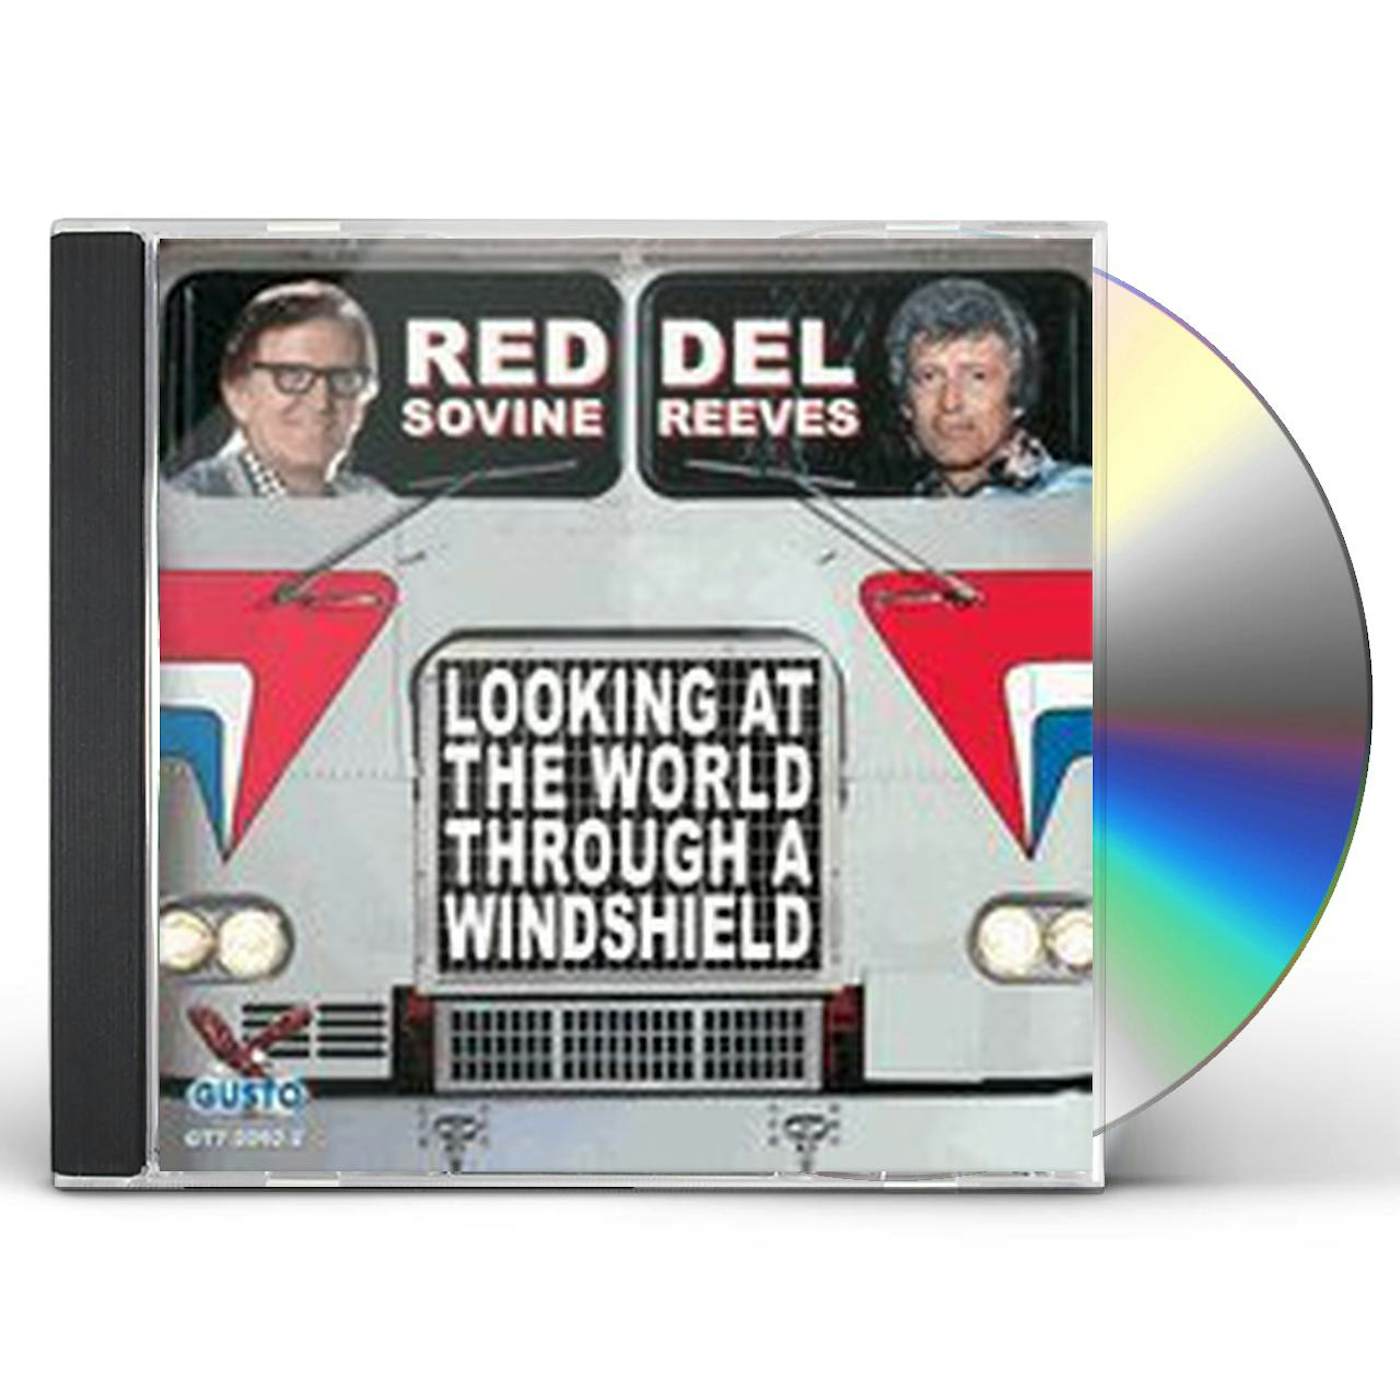 Del Reeves LOOKING AT THE WORLD CD